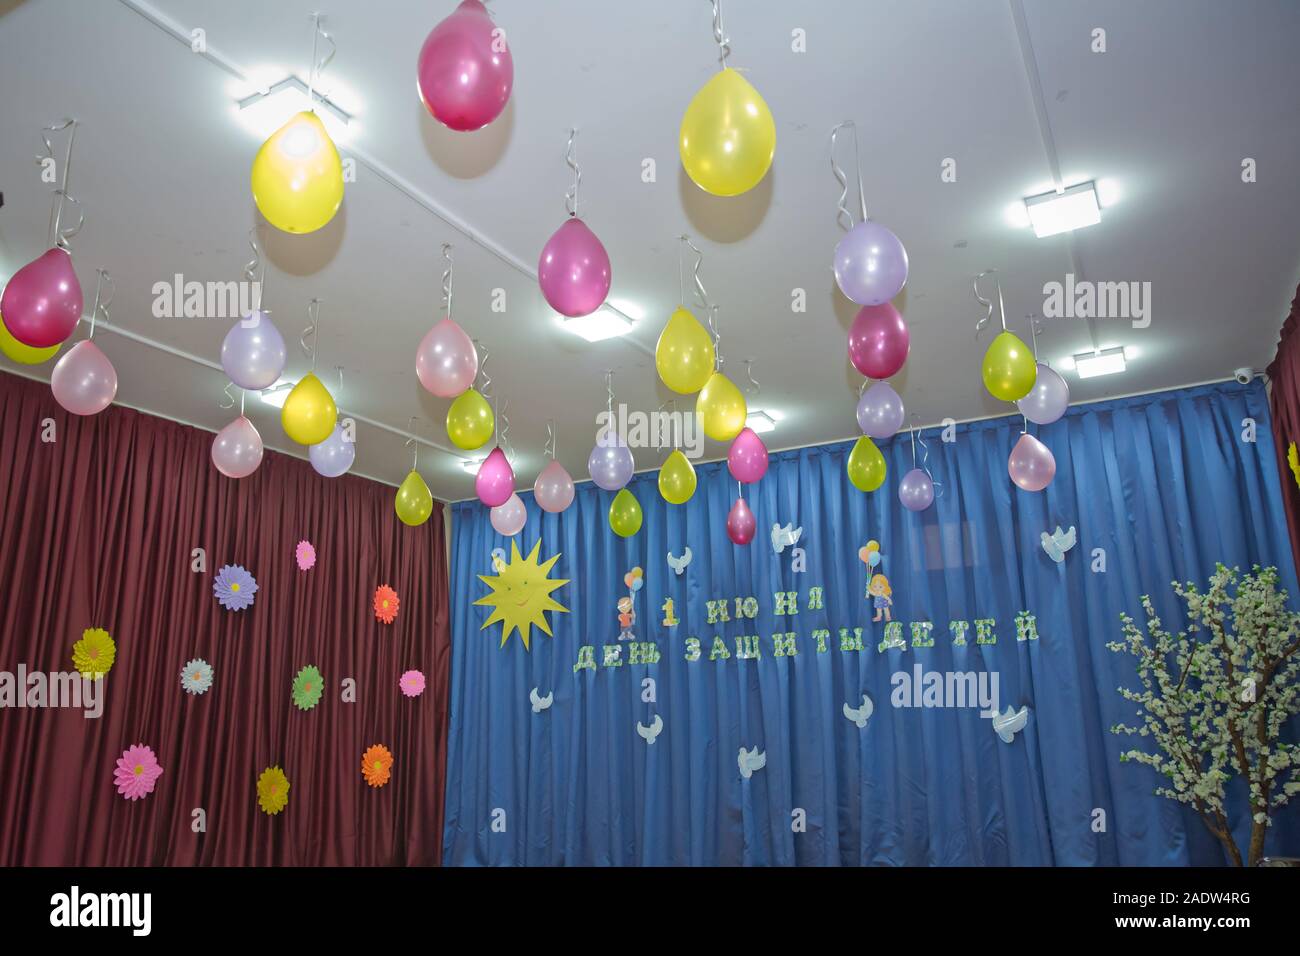 Pink And Yellow Balloons Float On The White Ceiling In The Room